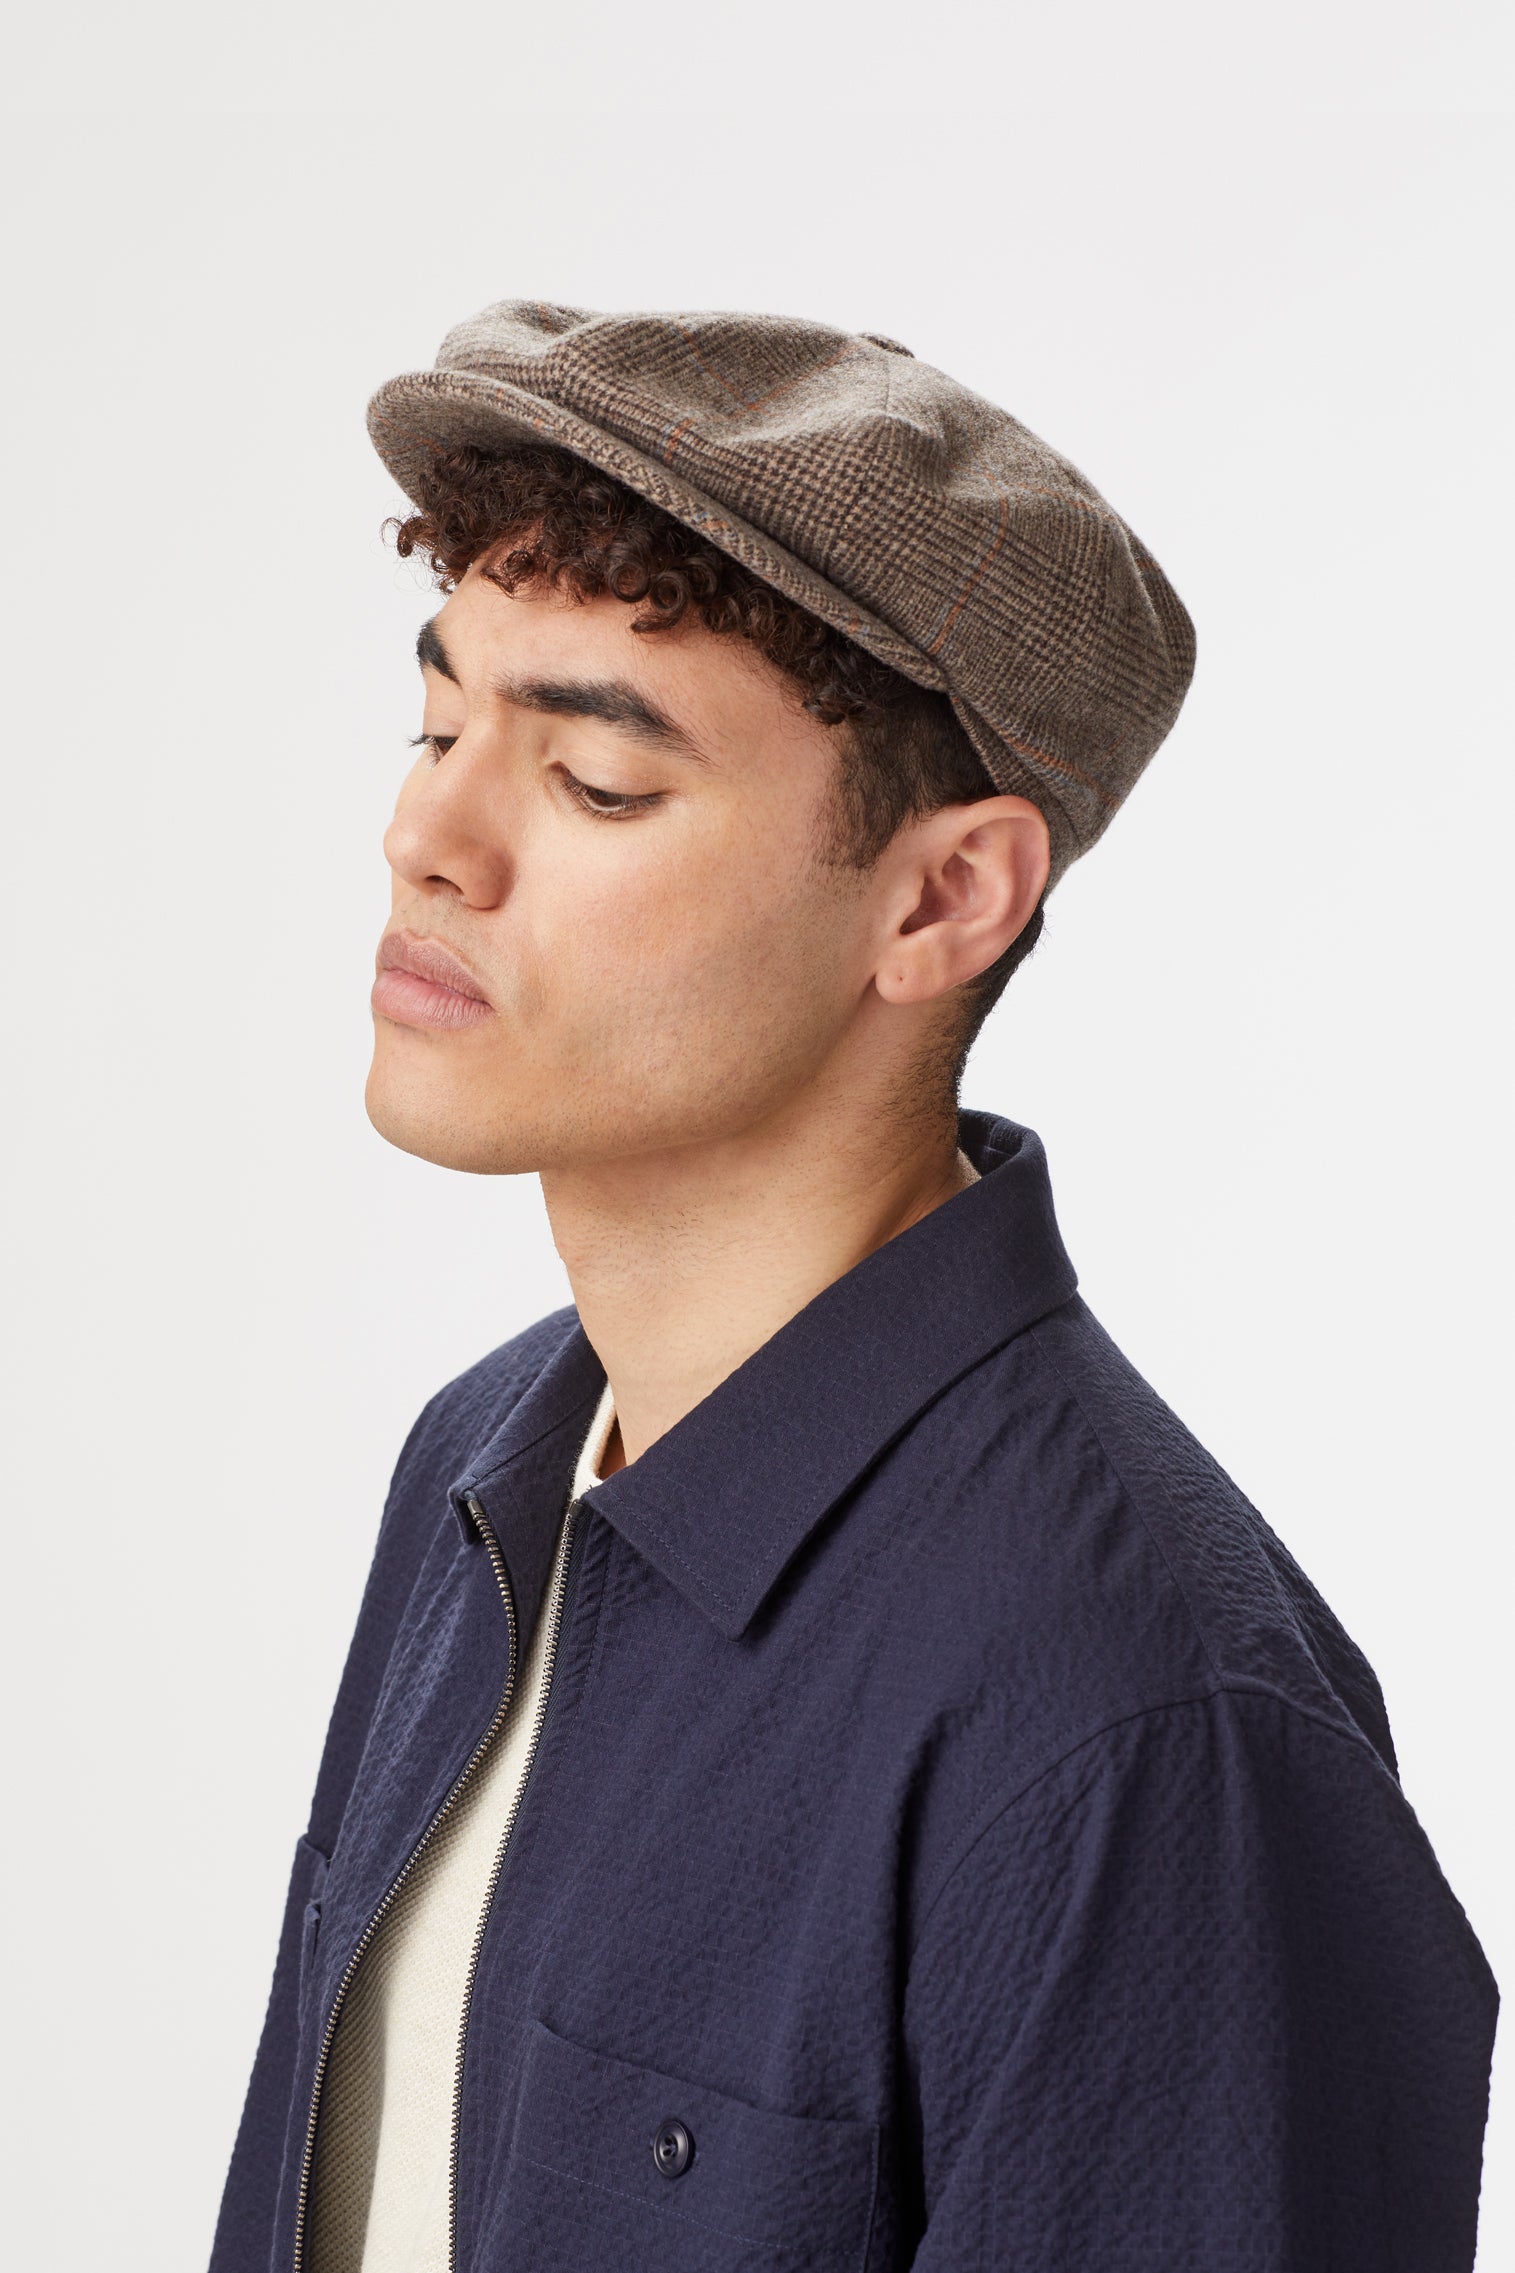 Escorial Wool Tremelo Bakerboy Cap - Hats for Oval Face Shapes - Lock & Co. Hatters London UK